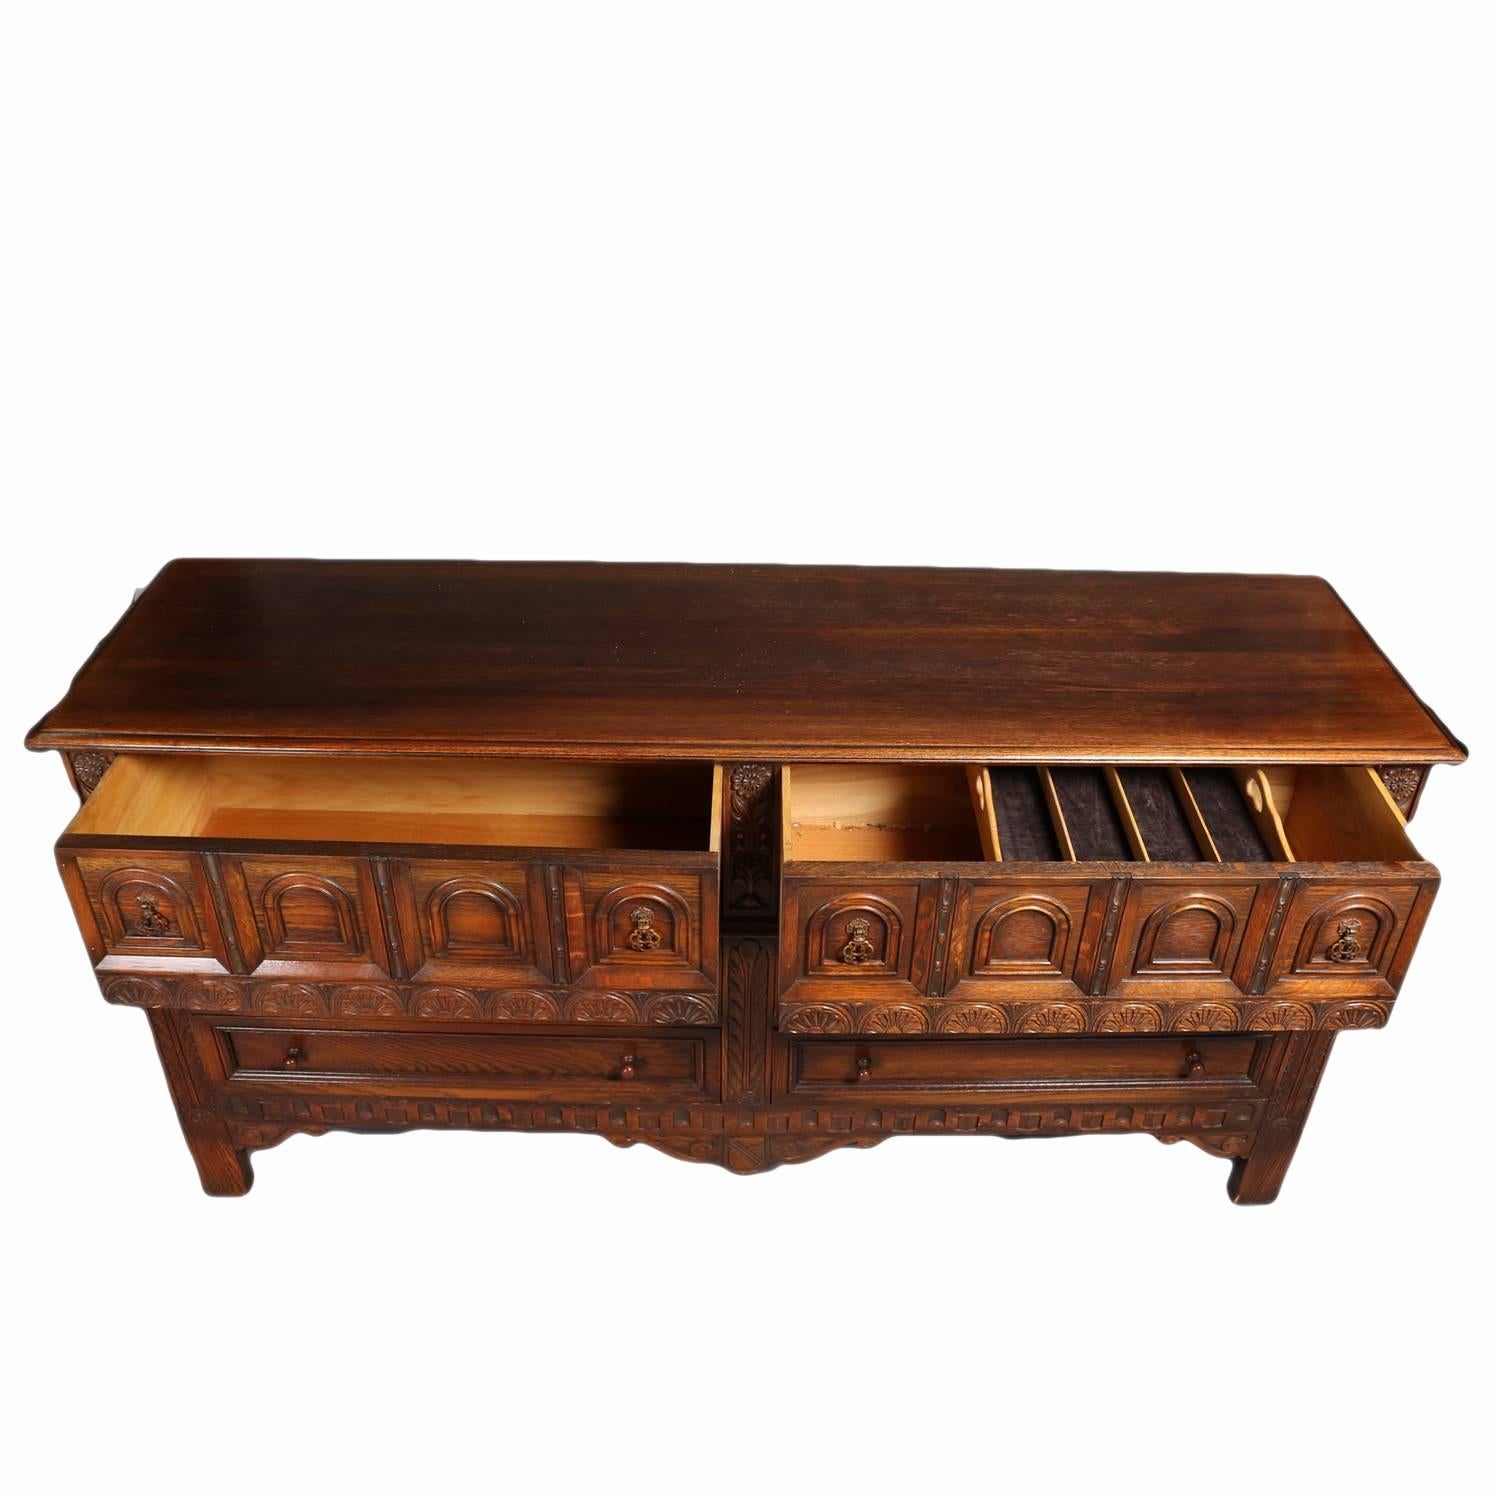 Antique Edwardian oak sideboard features Jacobean influence with heavily carved sunburst and foliate bordering, paneled sides and front including arched reserves in upper drawers, and scrolled skirting, en verso original Kittinger Furniture tag,